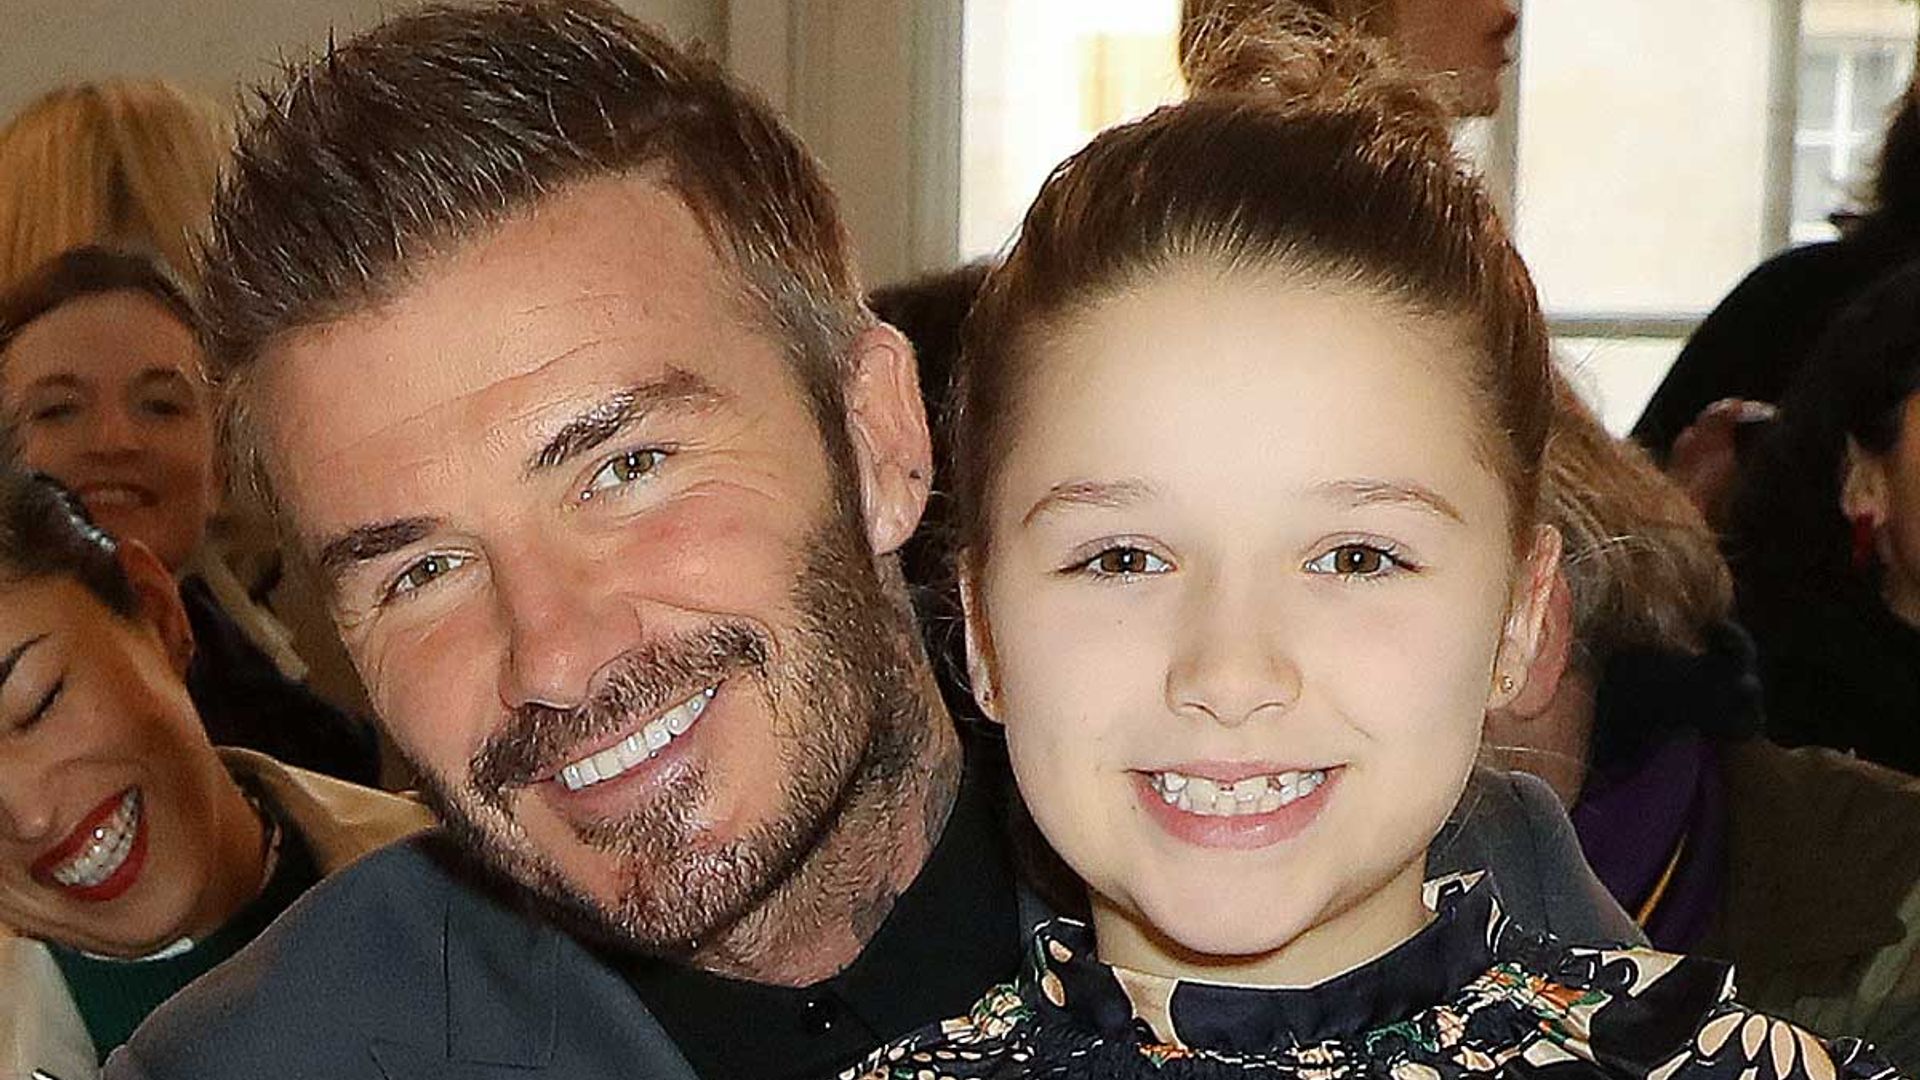 Breakfast with the Beckhams! David Beckham teaches Harper new skill in adorable video